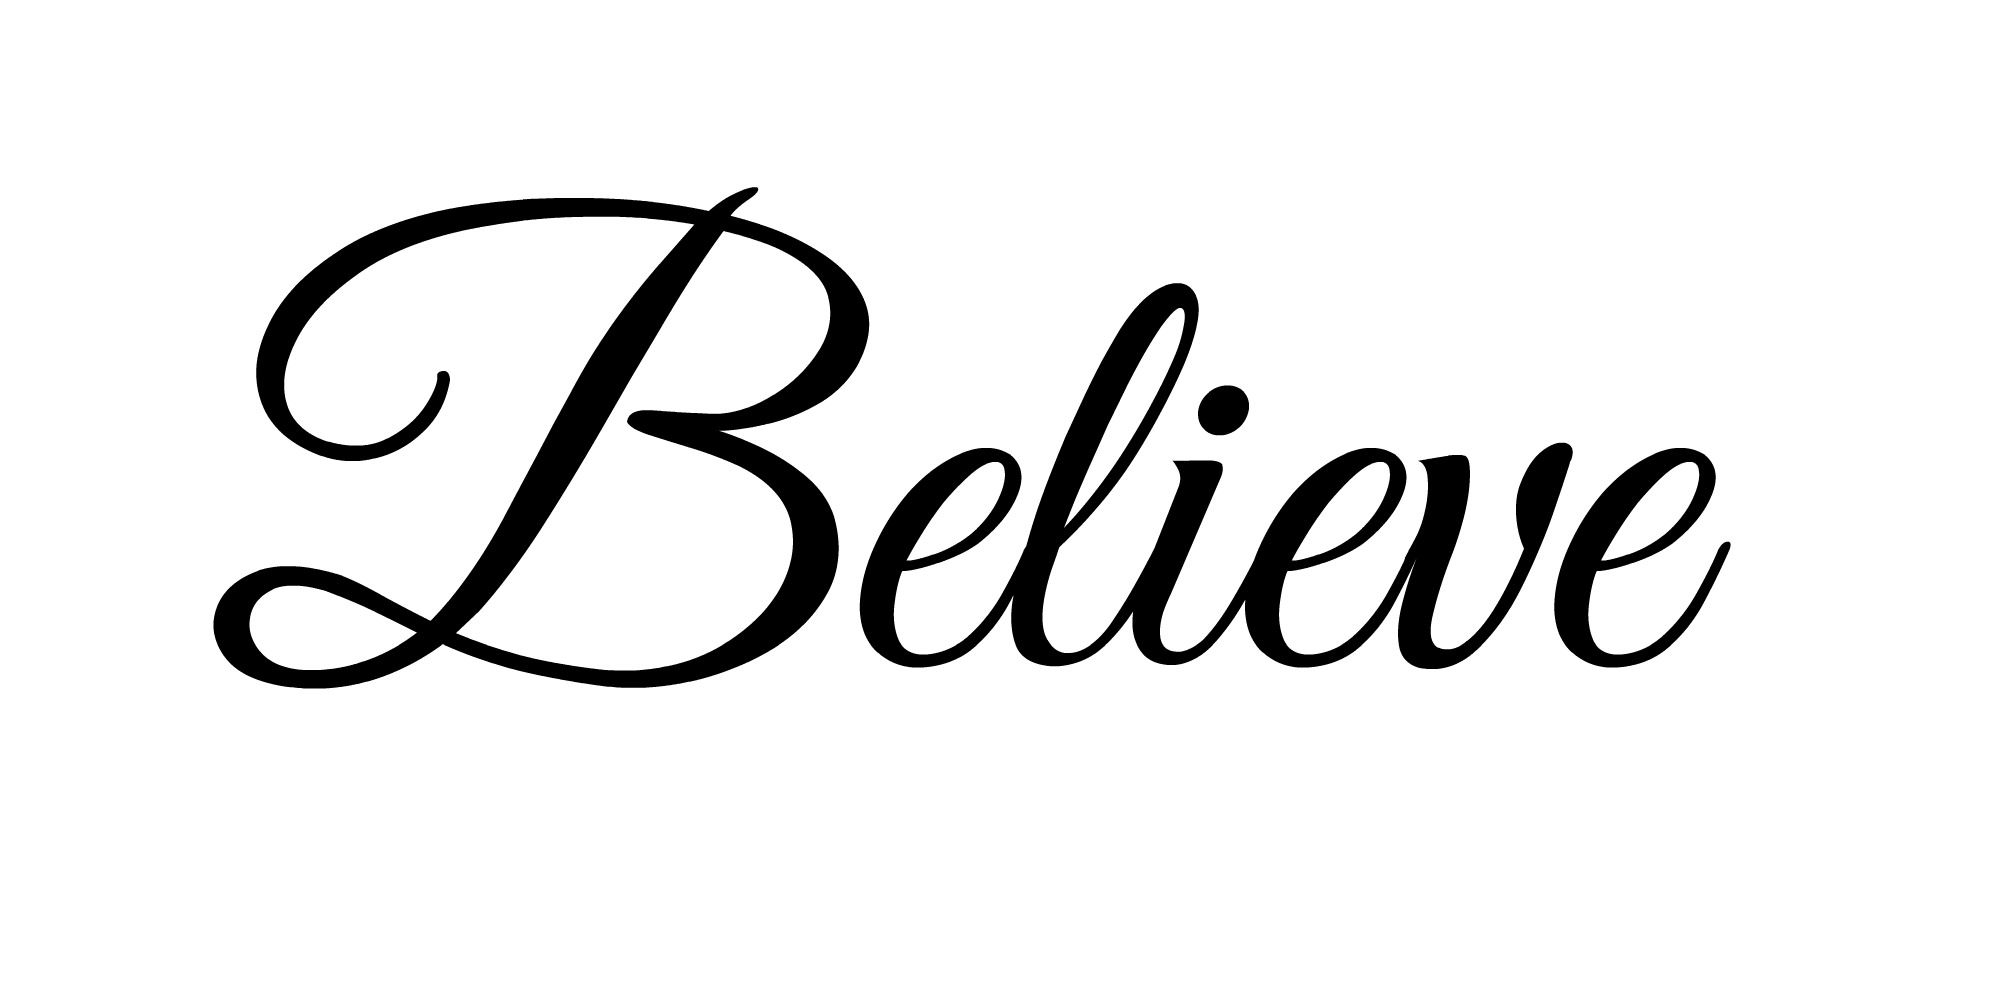 Amazing Believe Pictures & Backgrounds